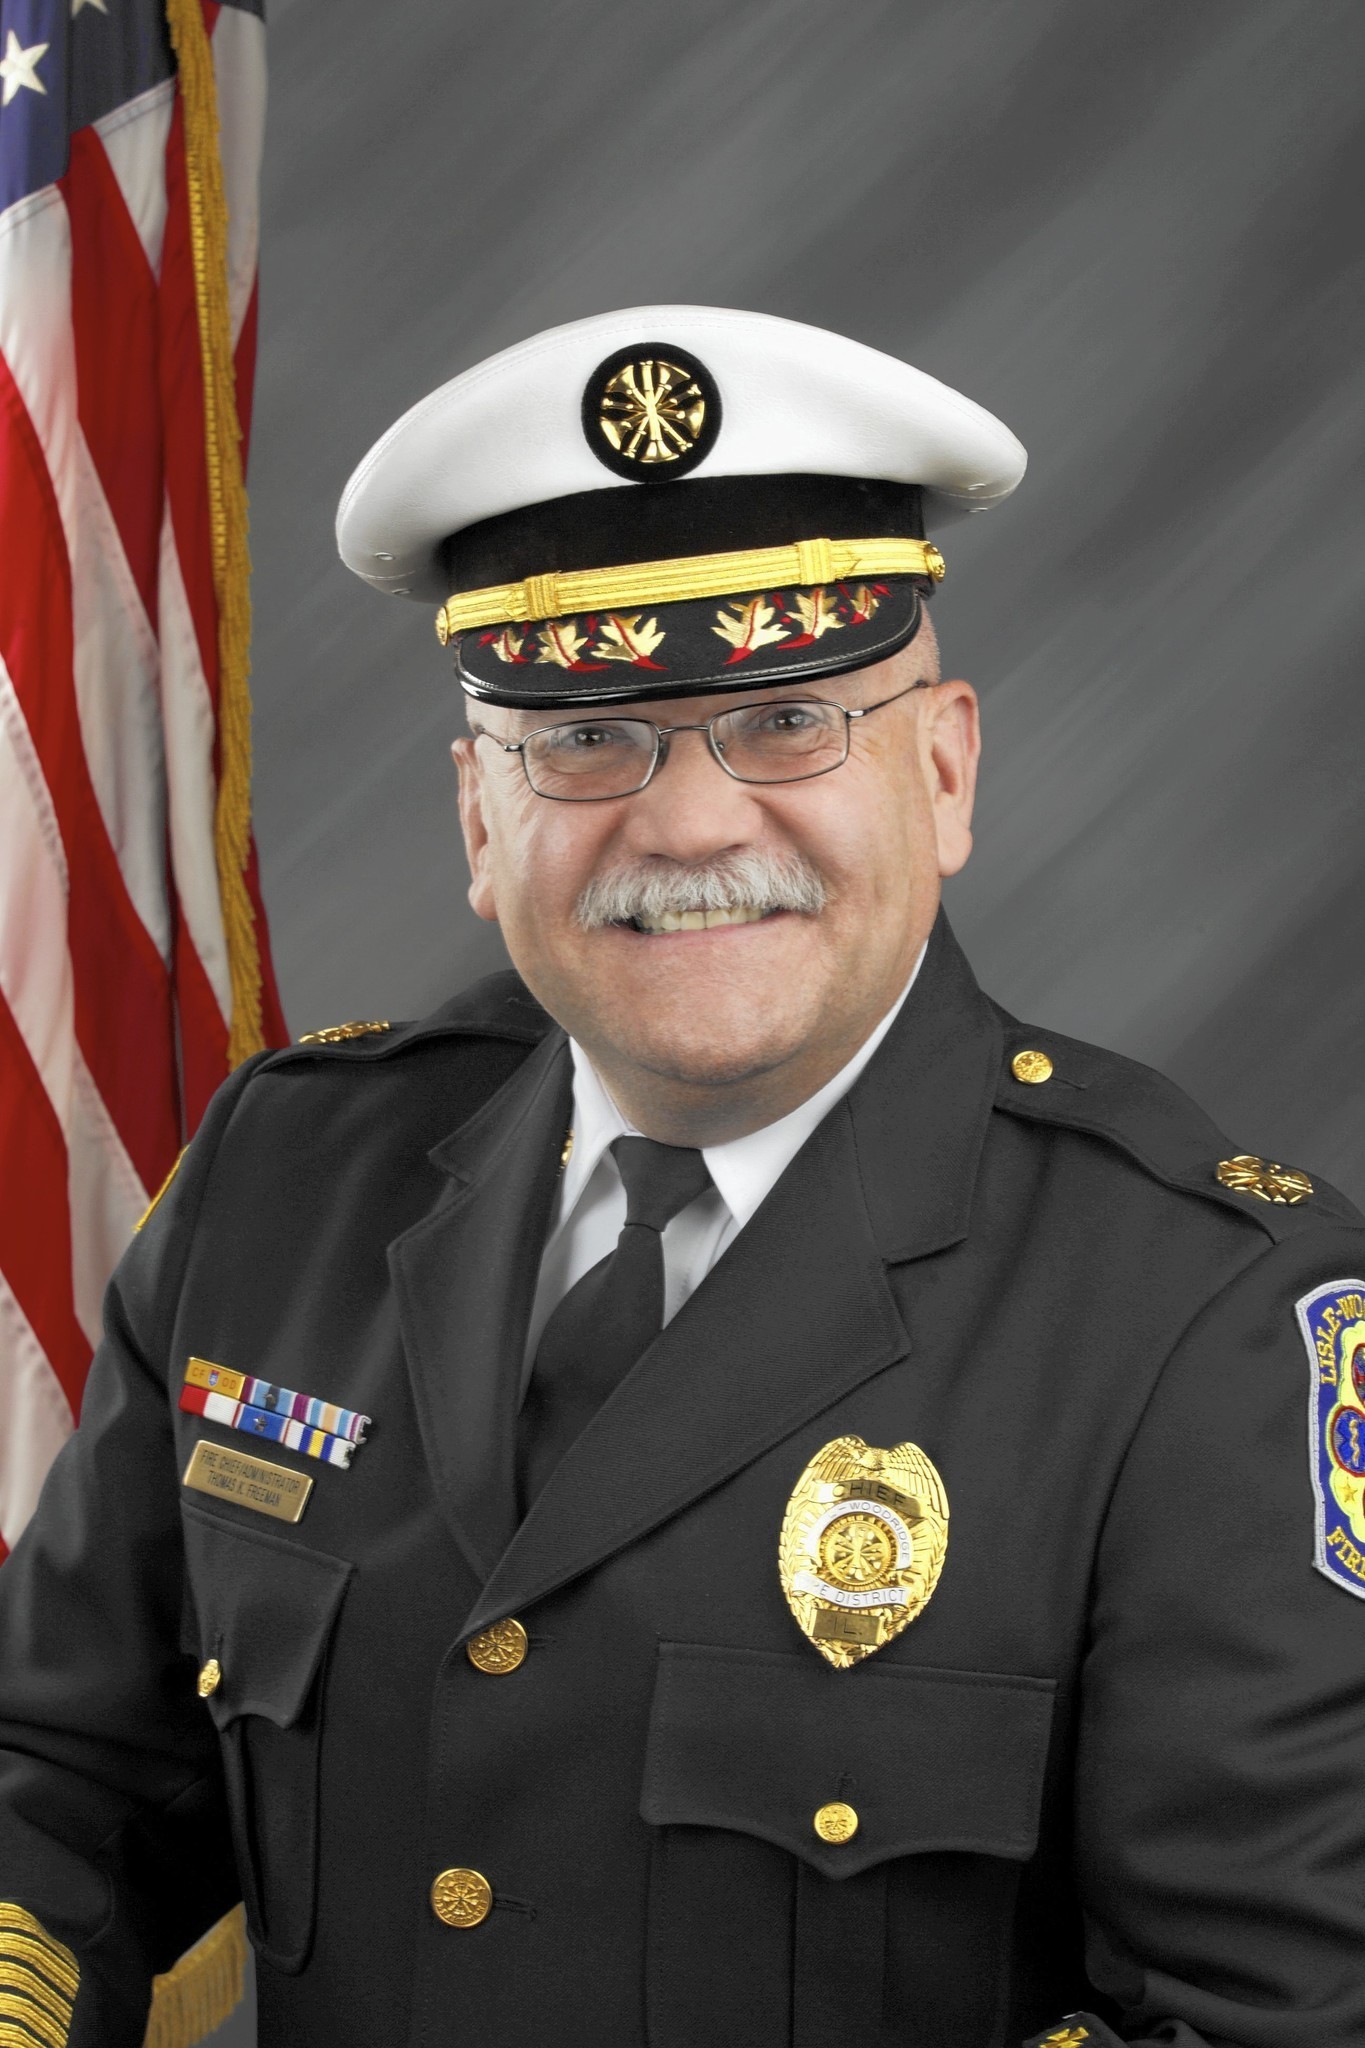 A Fire Department Chief